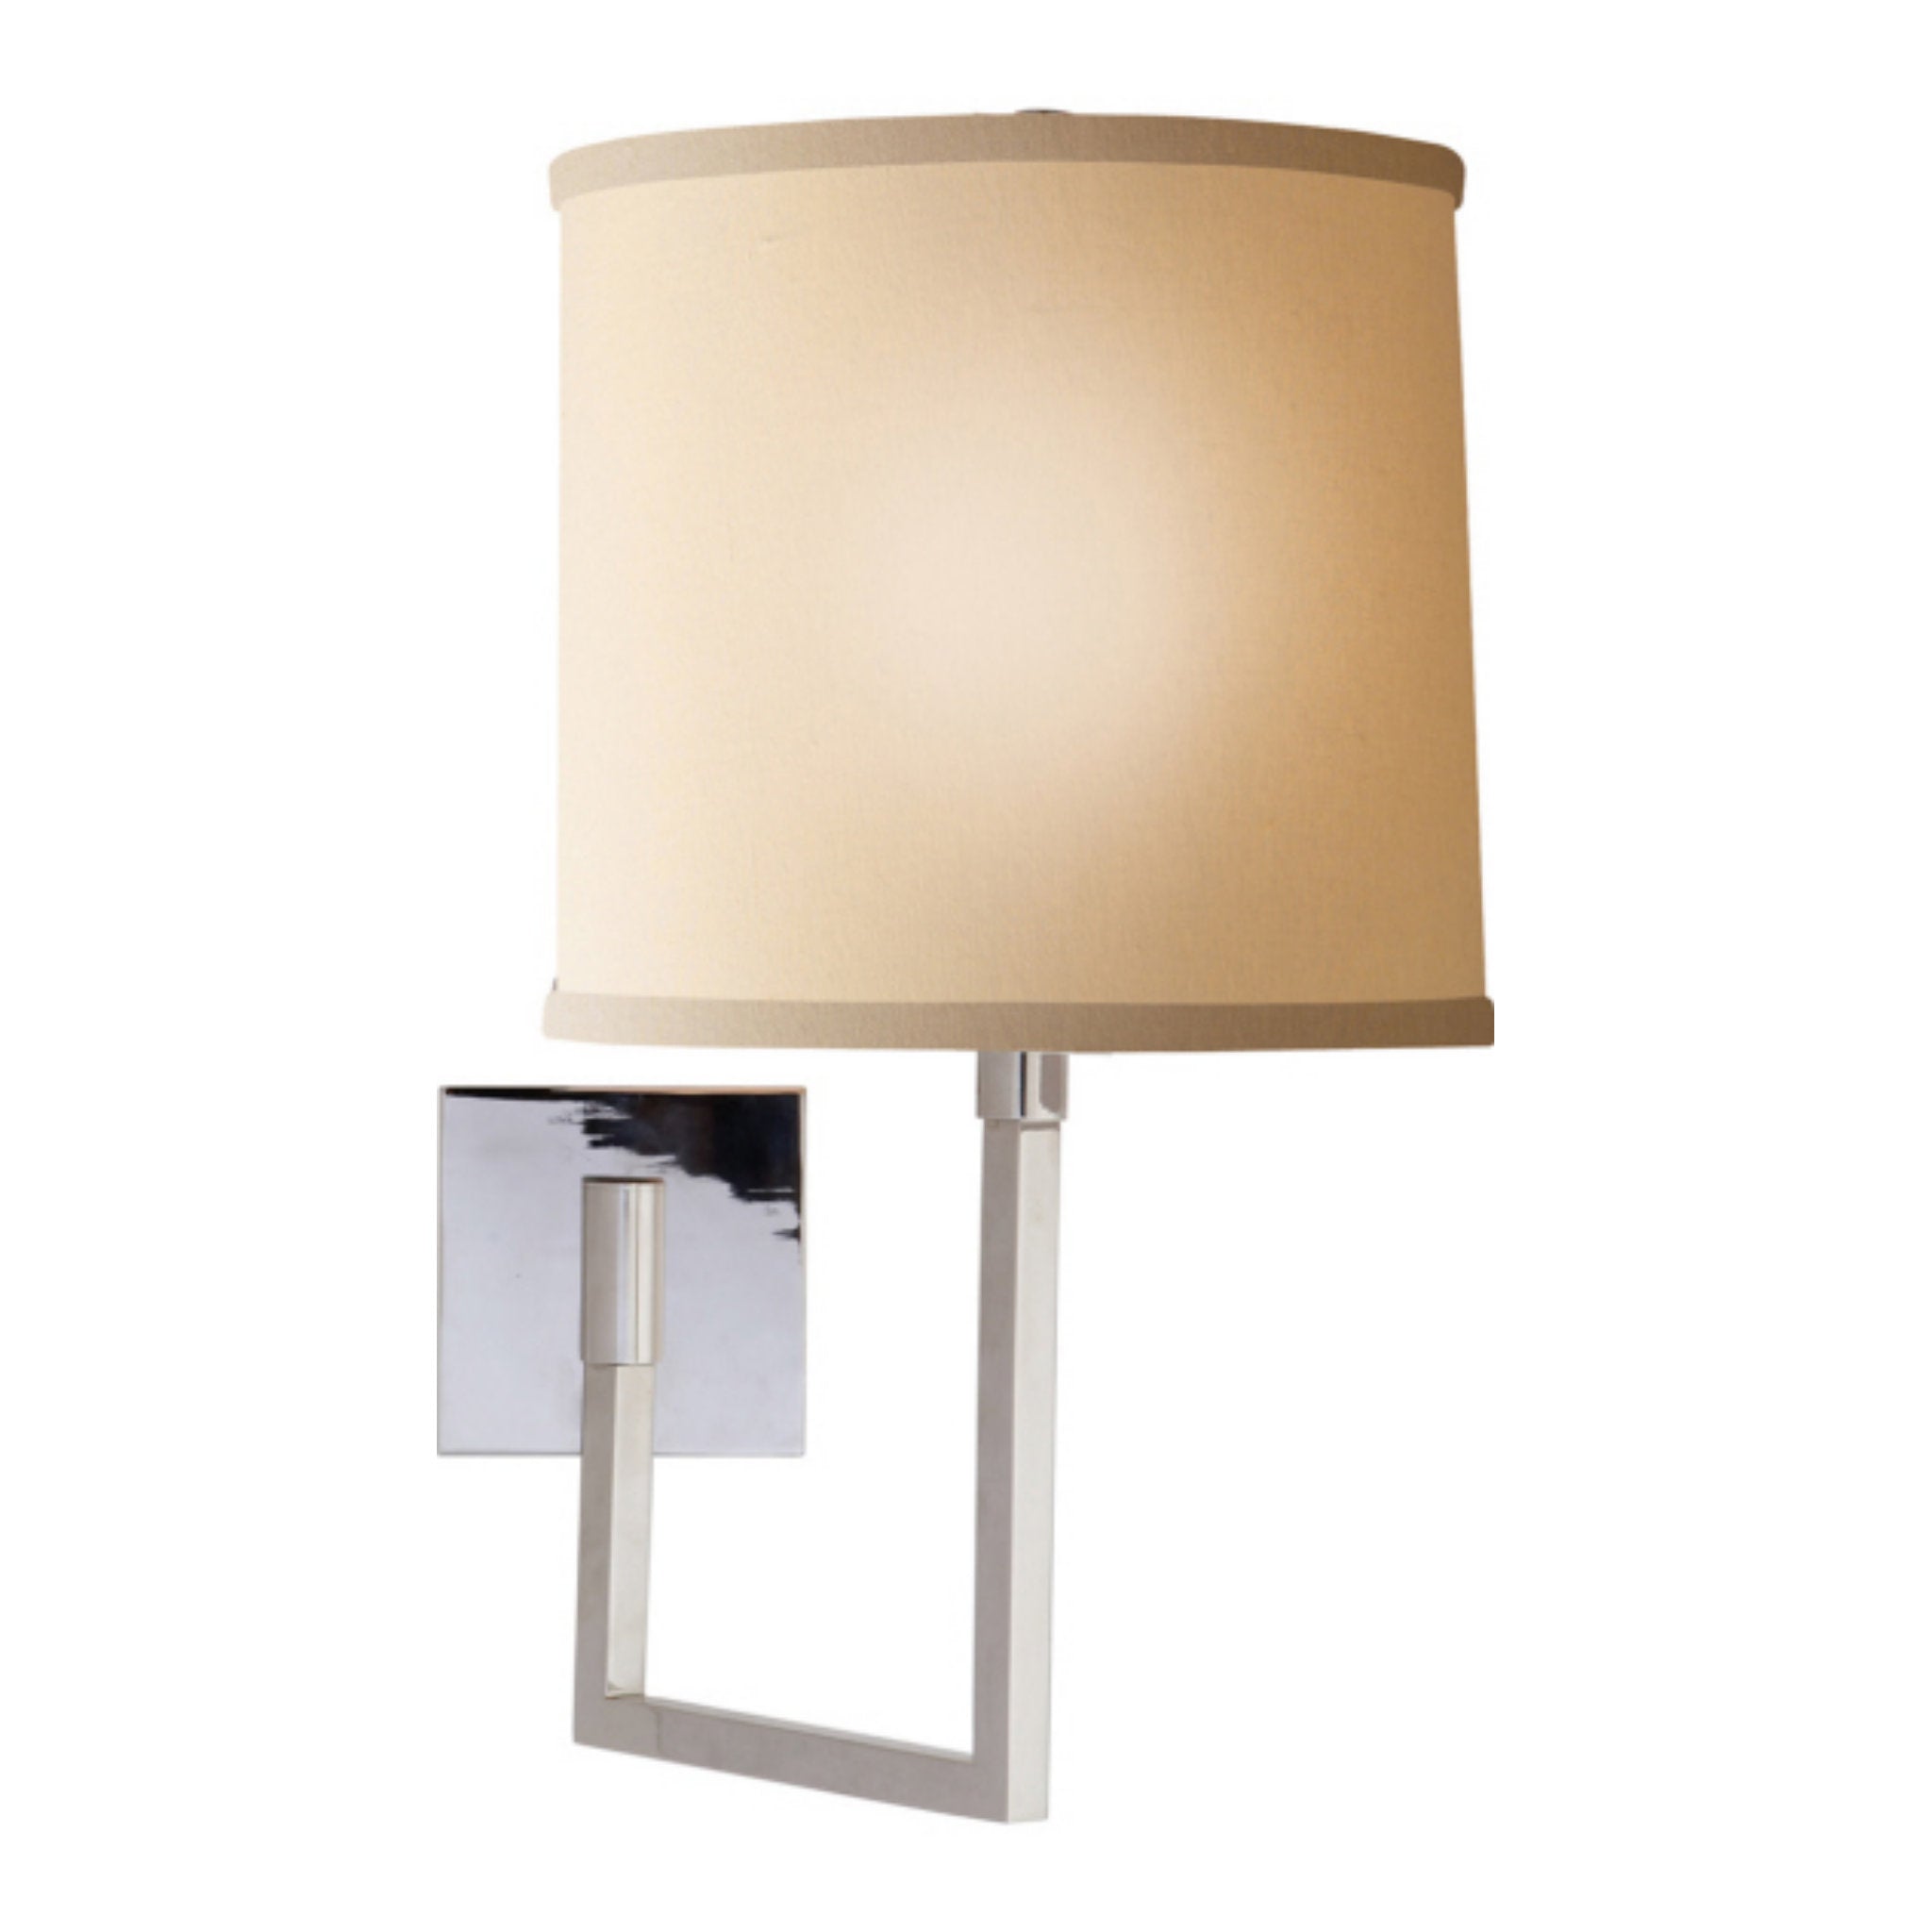 Barbara Barry Aspect Large Articulating Sconce in Polished Nickel with Ivory Linen Shade